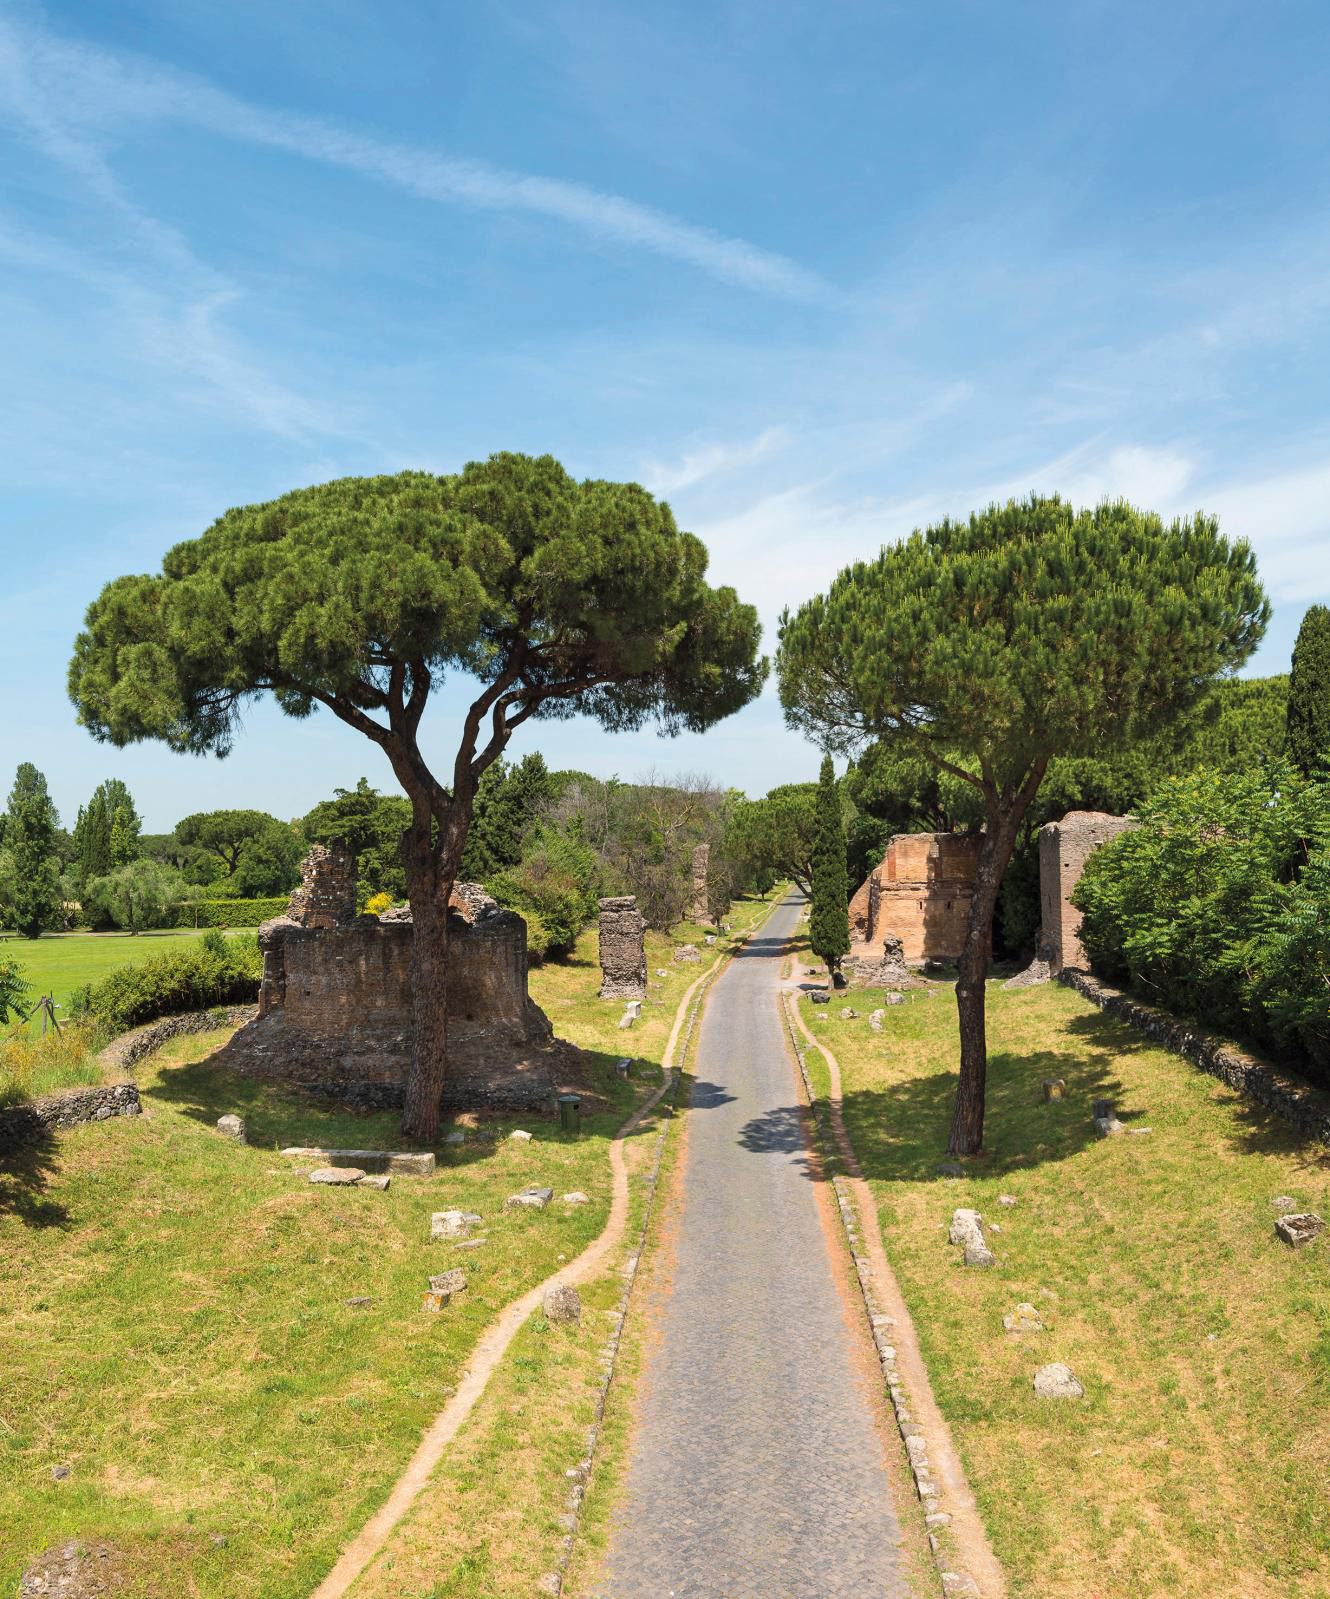 From Rome to Puglia: The Renaissance of the Appian Way